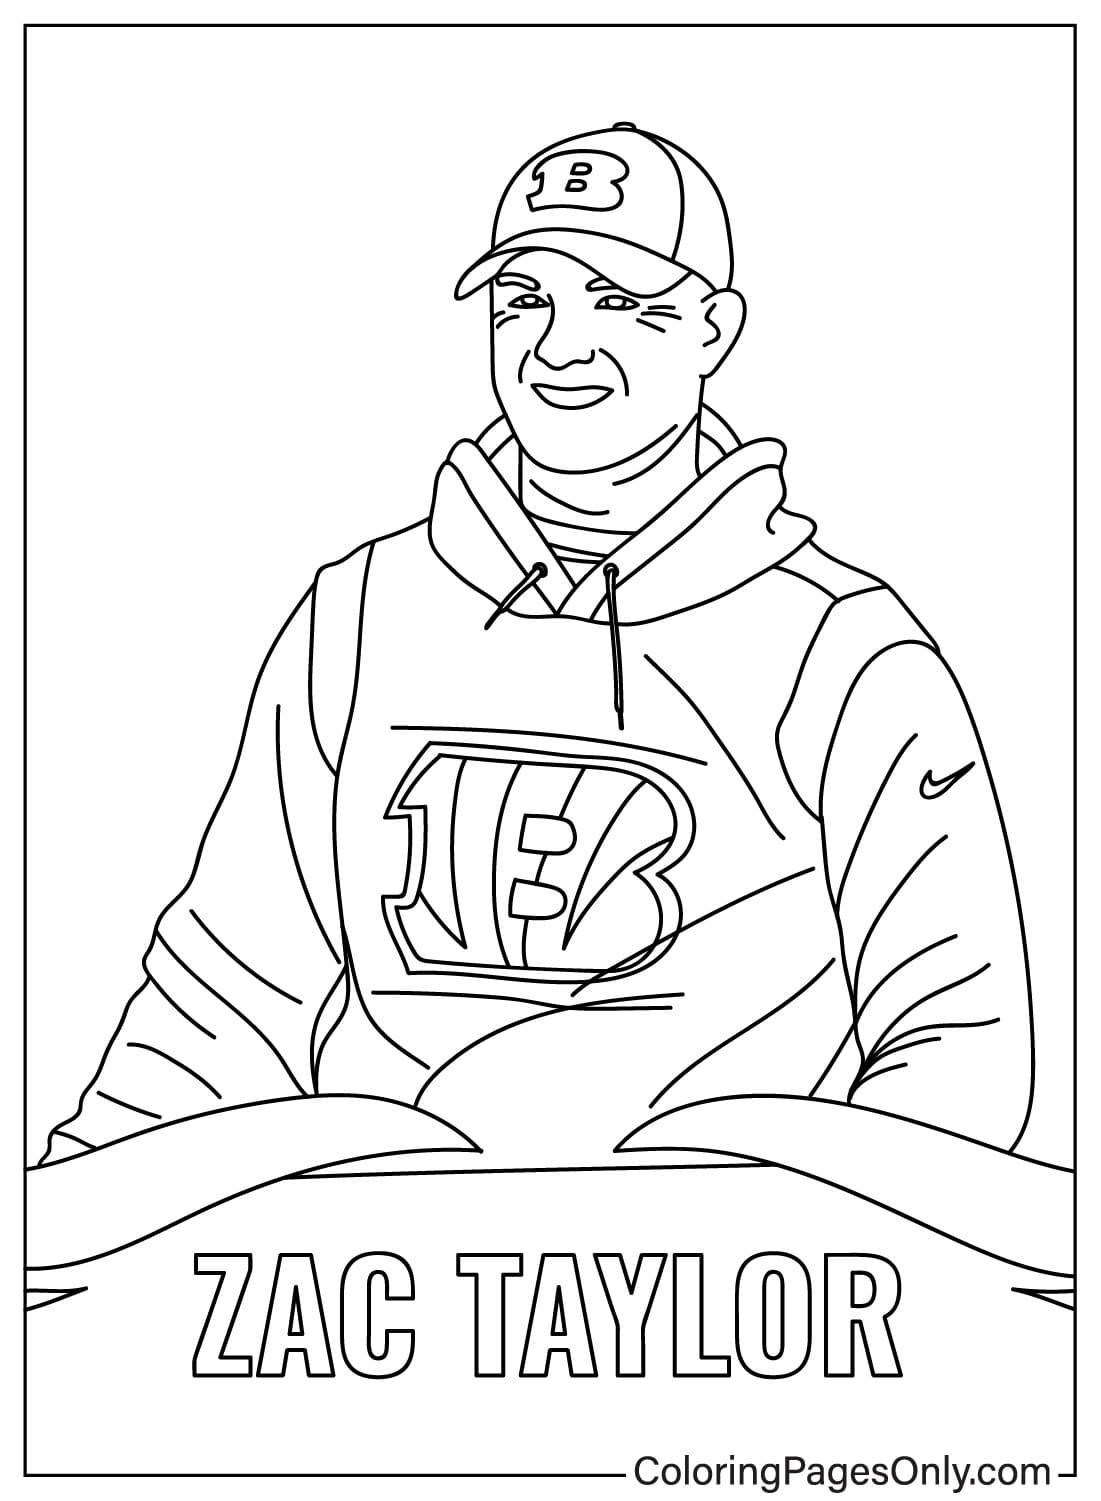 Zac Taylor Coloring Page from Cincinnati Bengals